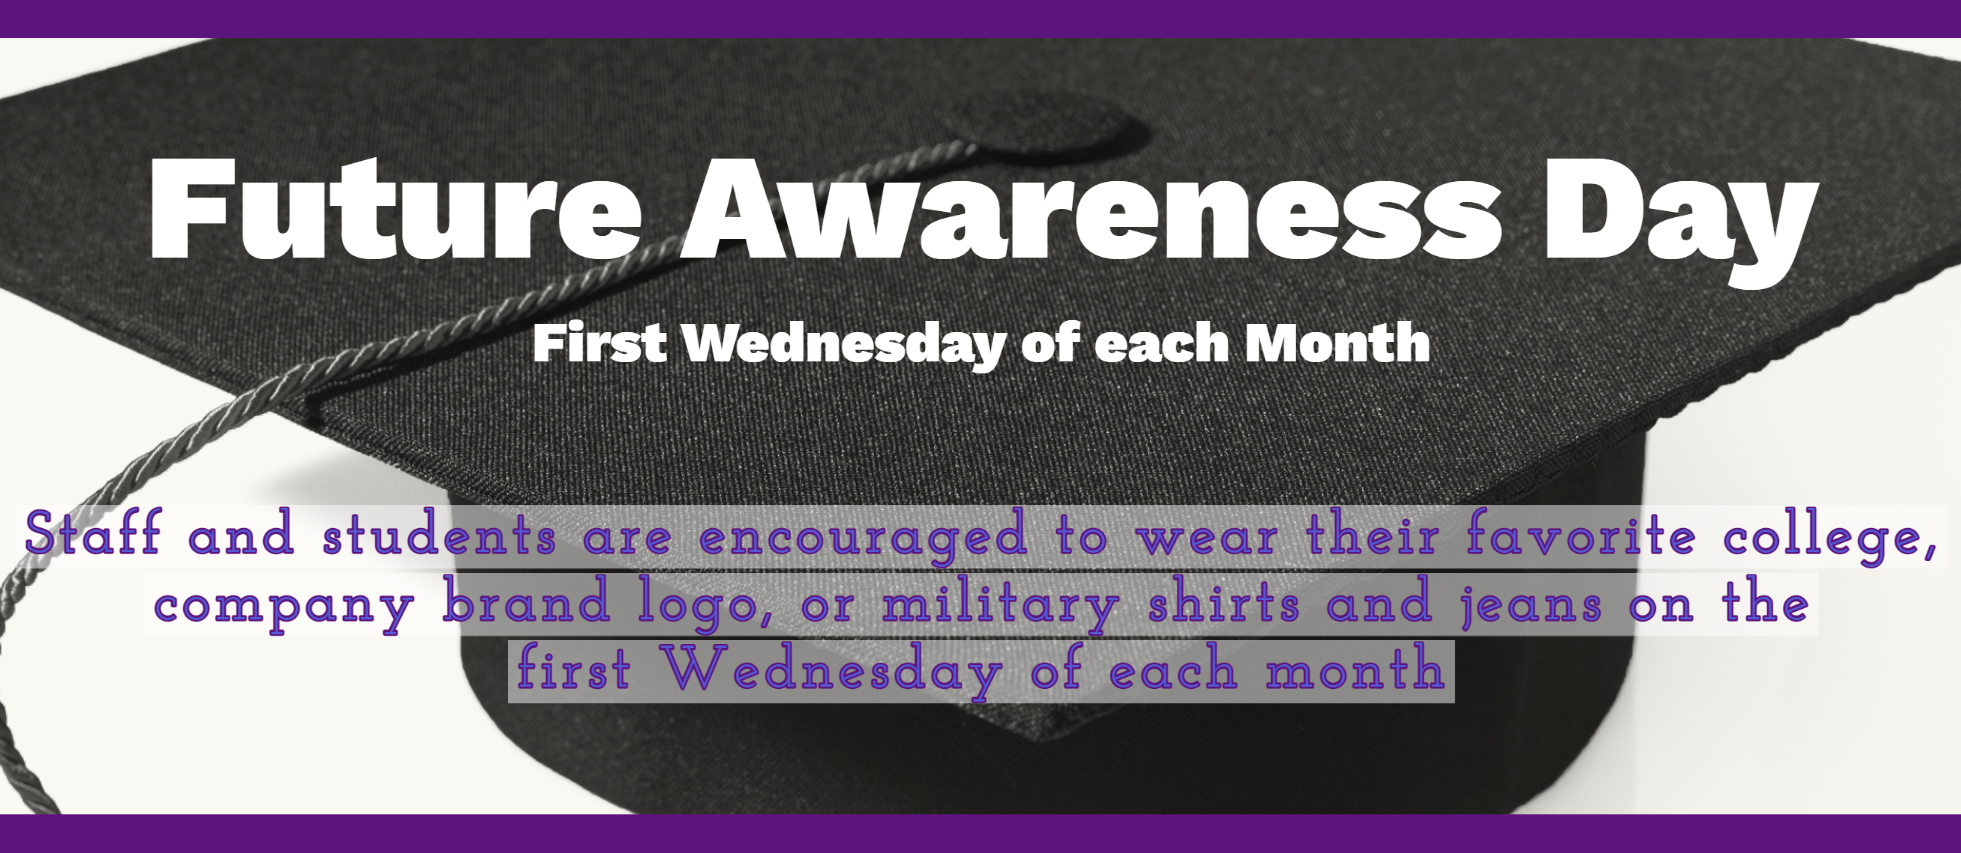 Future Awareness Day - 1st Wednesday of the month